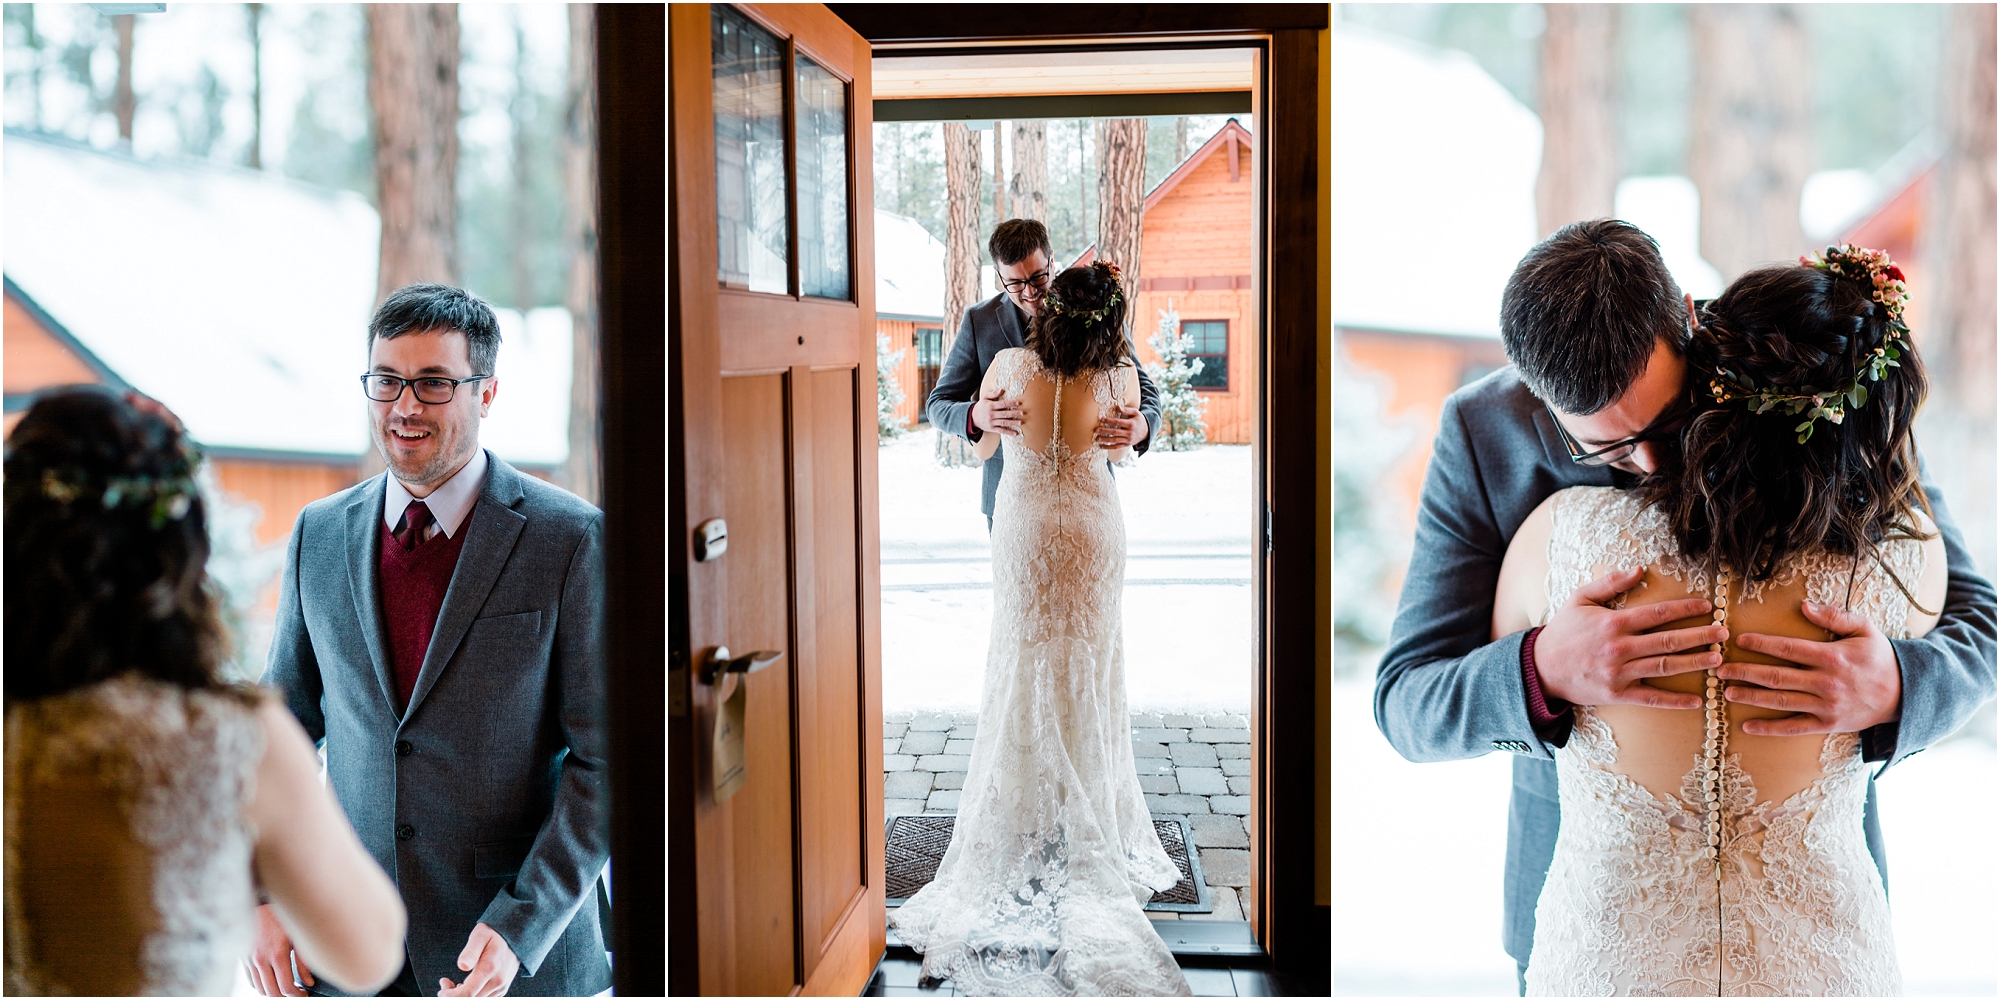 A groom sees his bride for the first time as she opens the door of her rustic cabin at Five Pine Lodge in Sisters, OR before their elopement ceremony. | Erica Swantek Photography